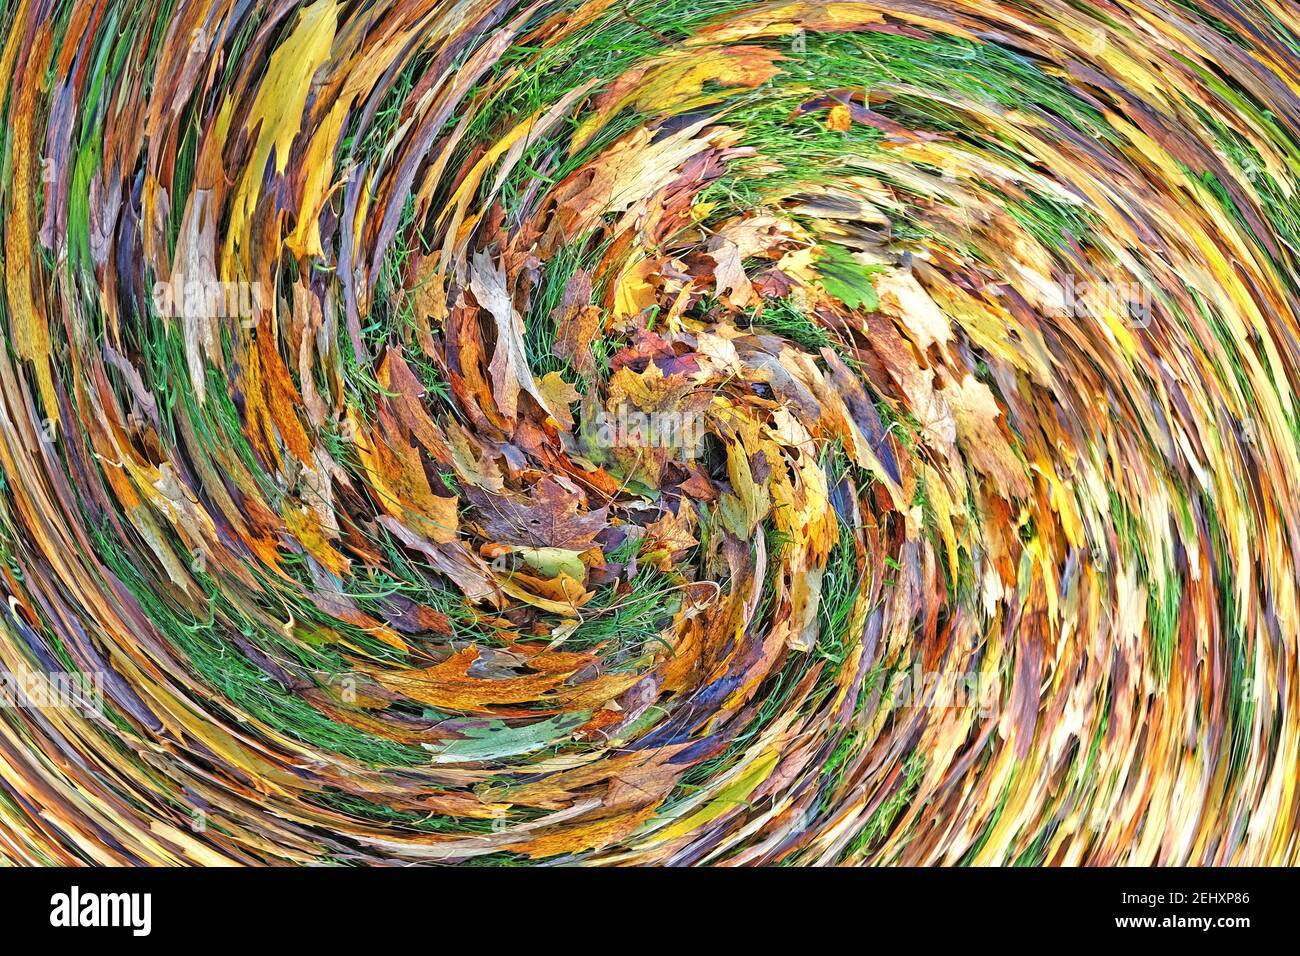 Abstract: Swirl or spiral of fallen Autumn leaves Stock Photo